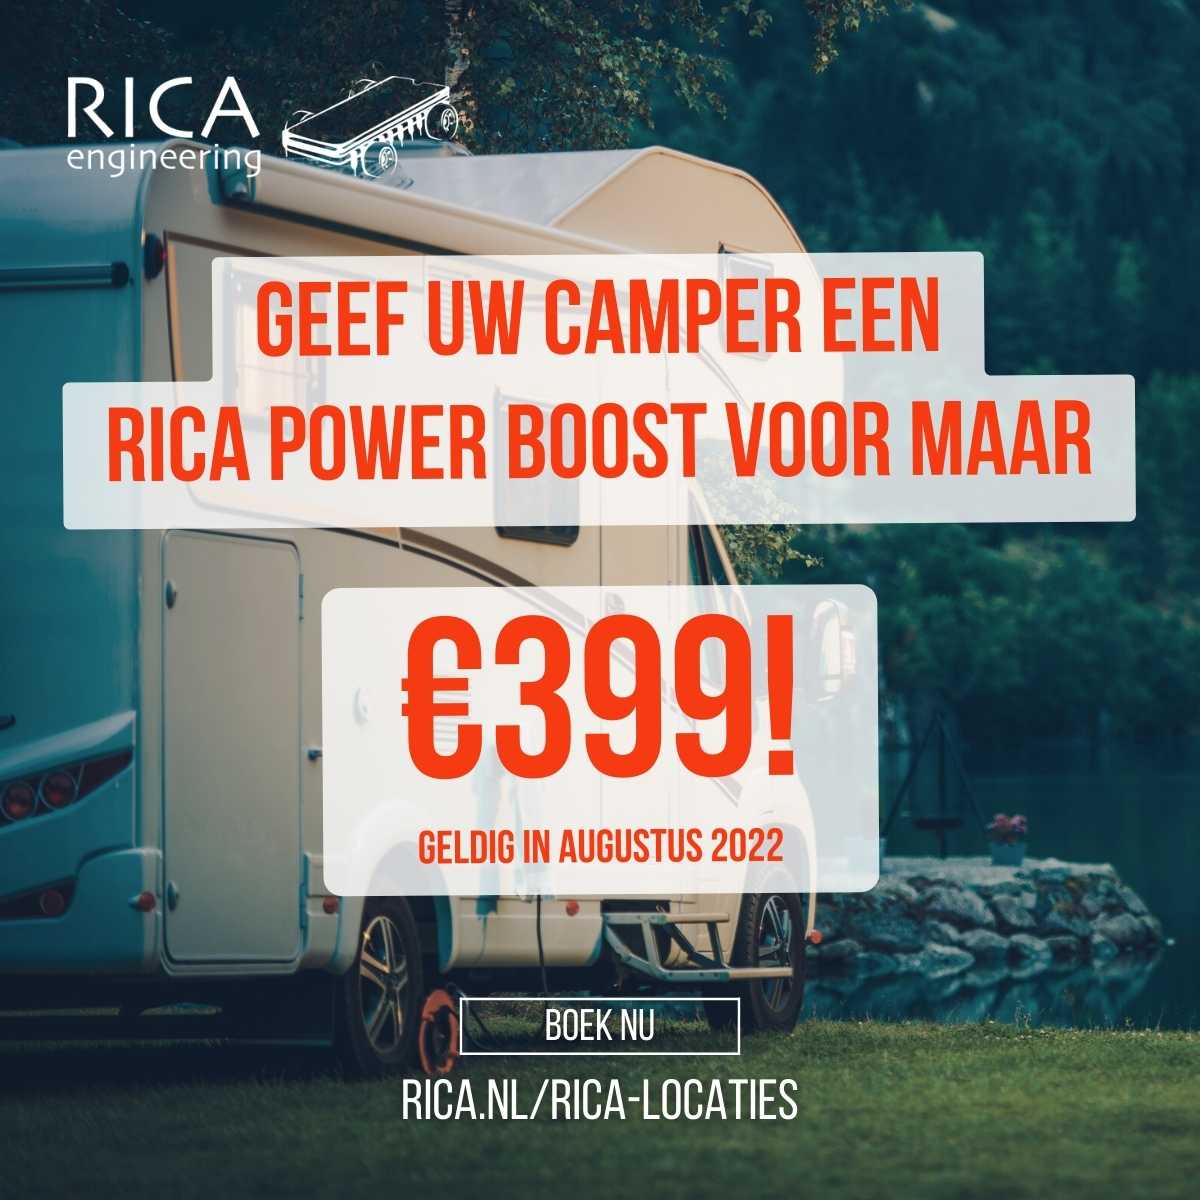 promo post text overlay rica deal on image of camper parked outside on a field